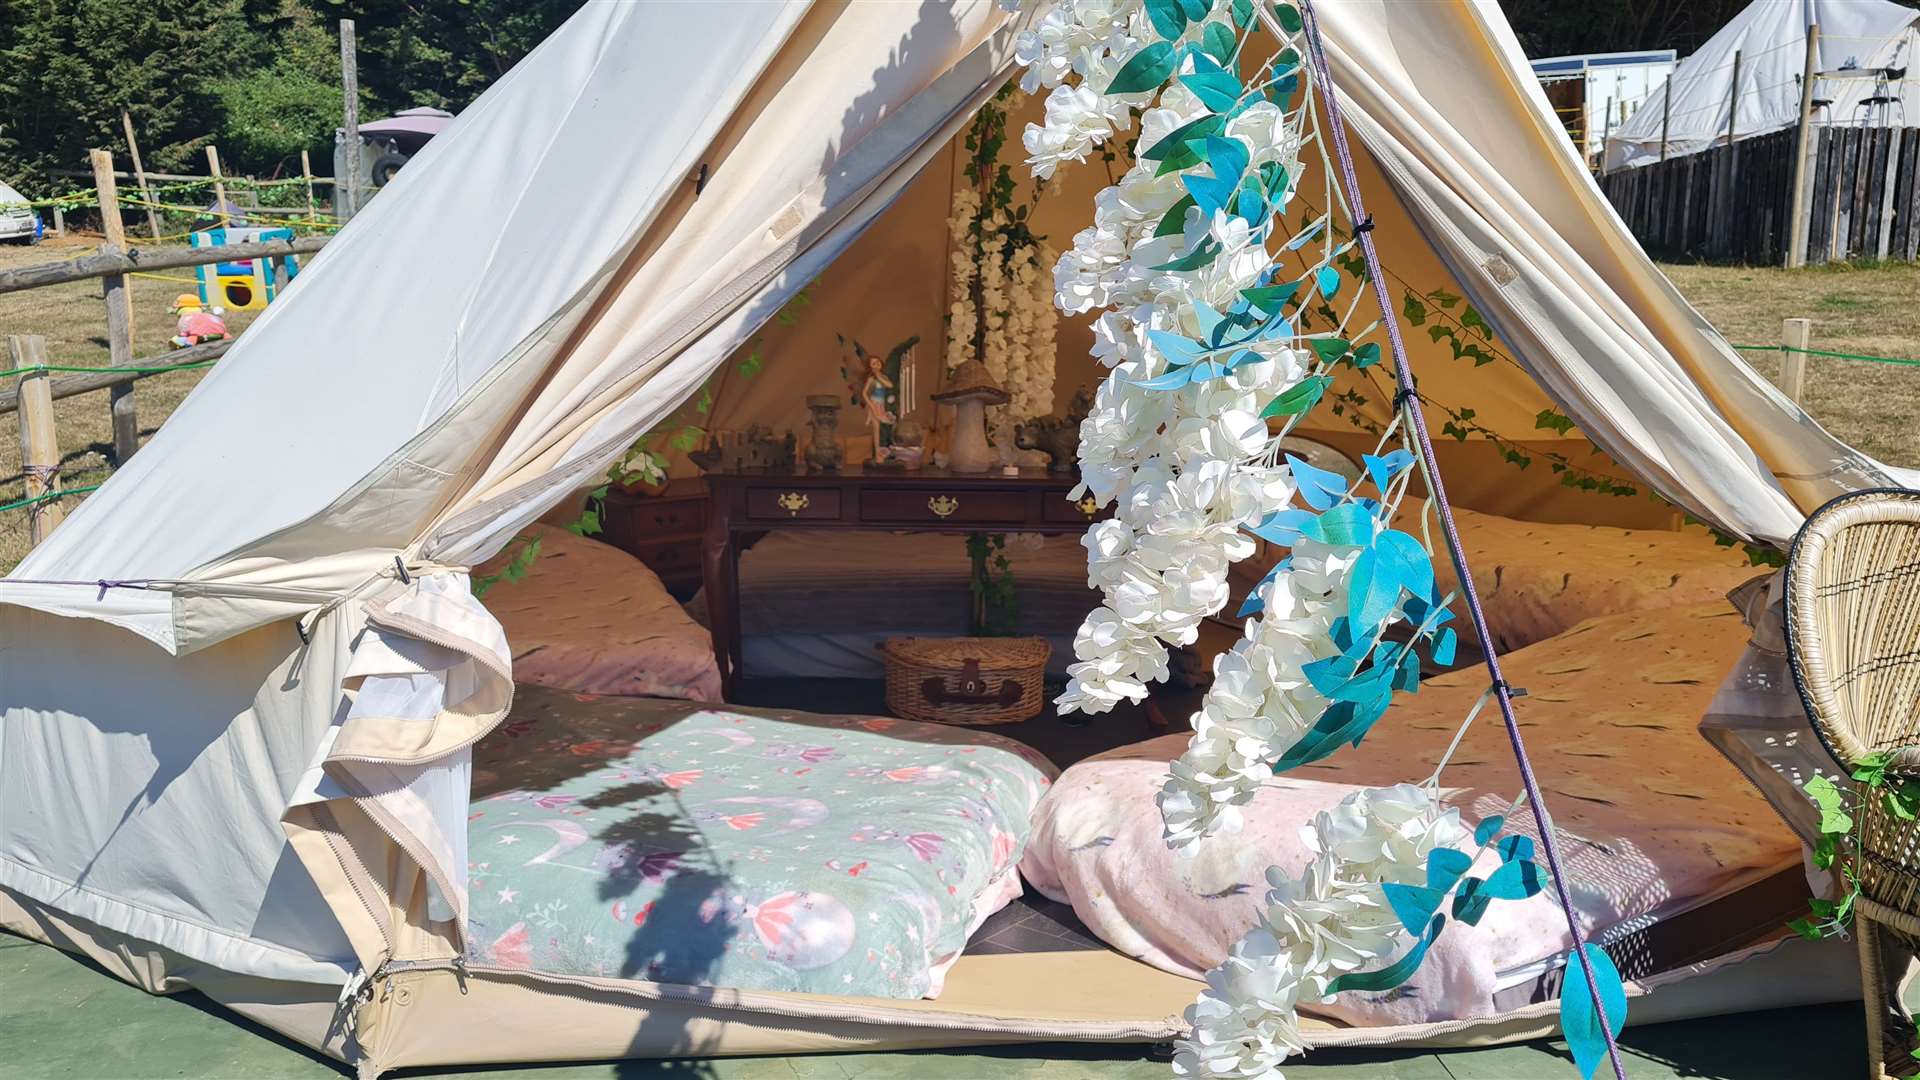 One of the glamping tents